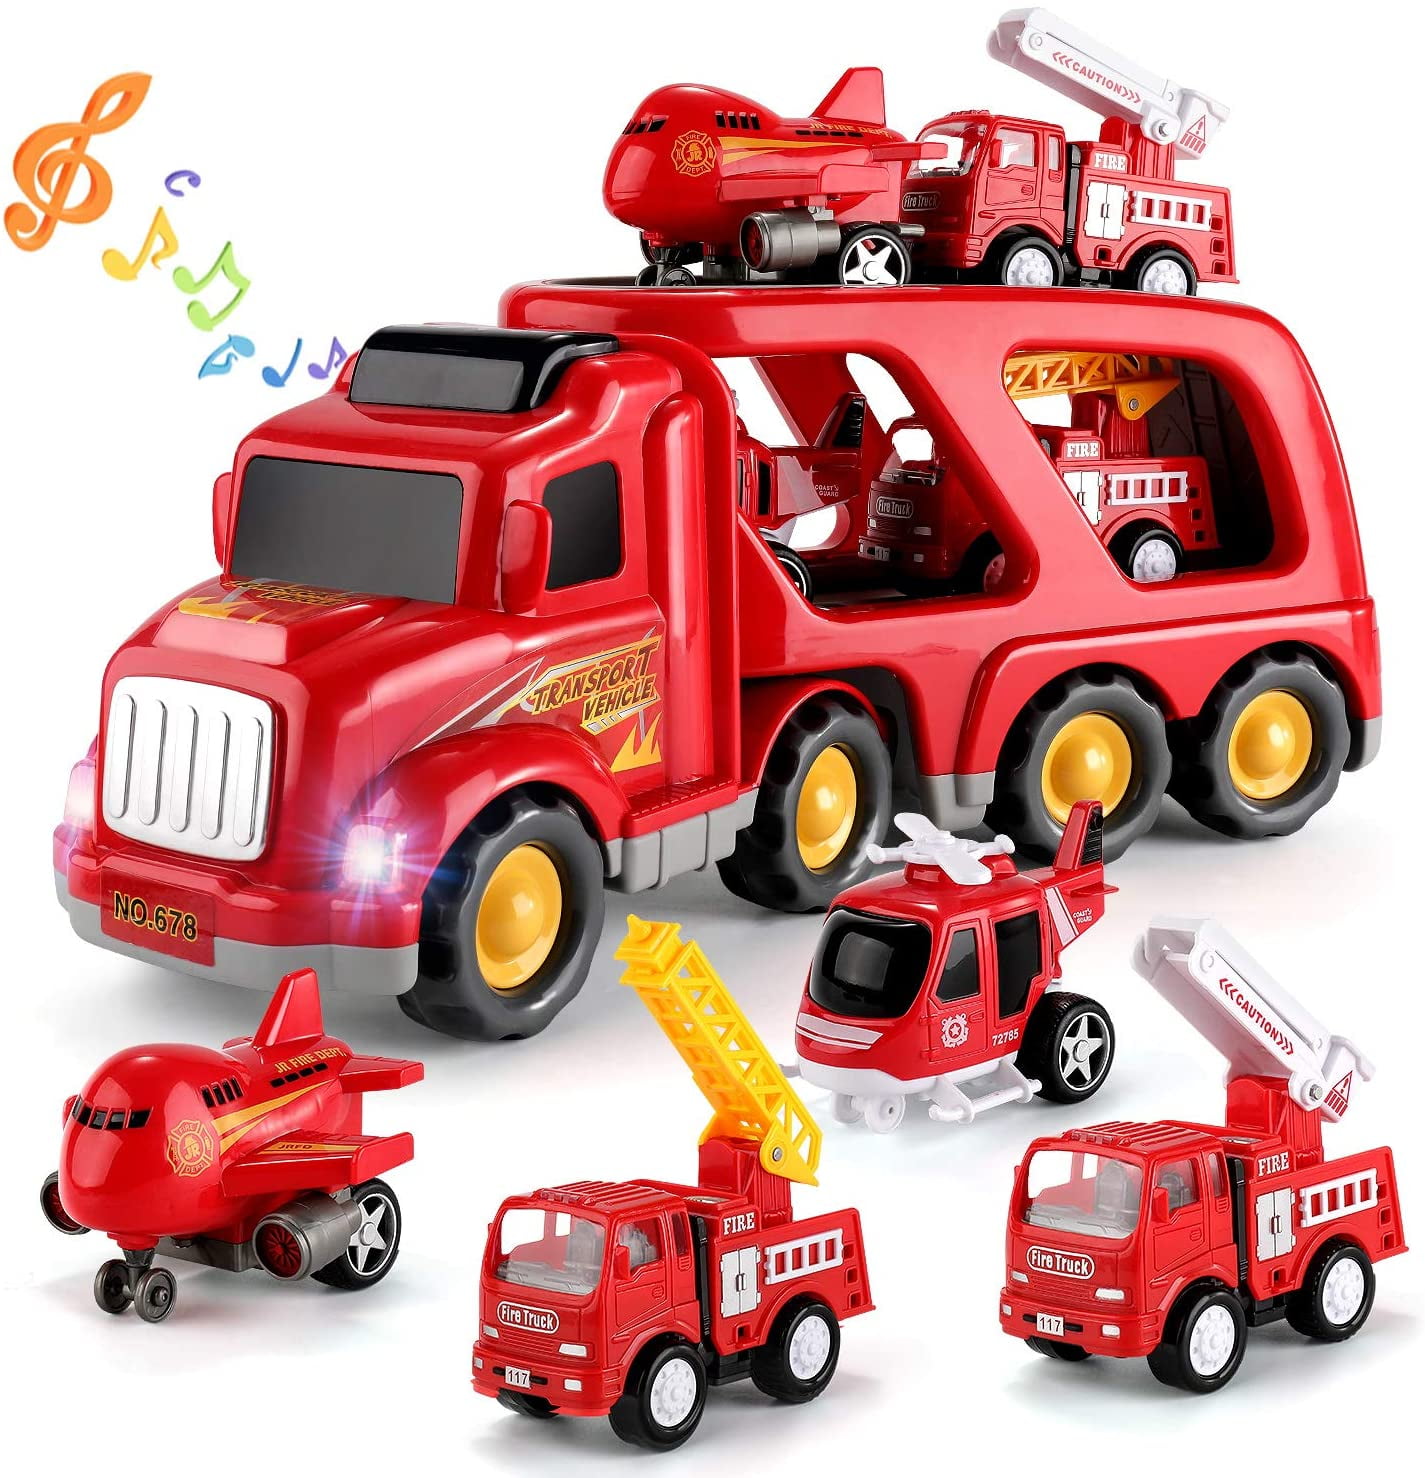 HINZER Fire Carrier Truck Transport Car Play Vehicles Toys for 3 Year Old Boys and Girls 5 in 1 Friction Power Push and Go Play Vehicles 